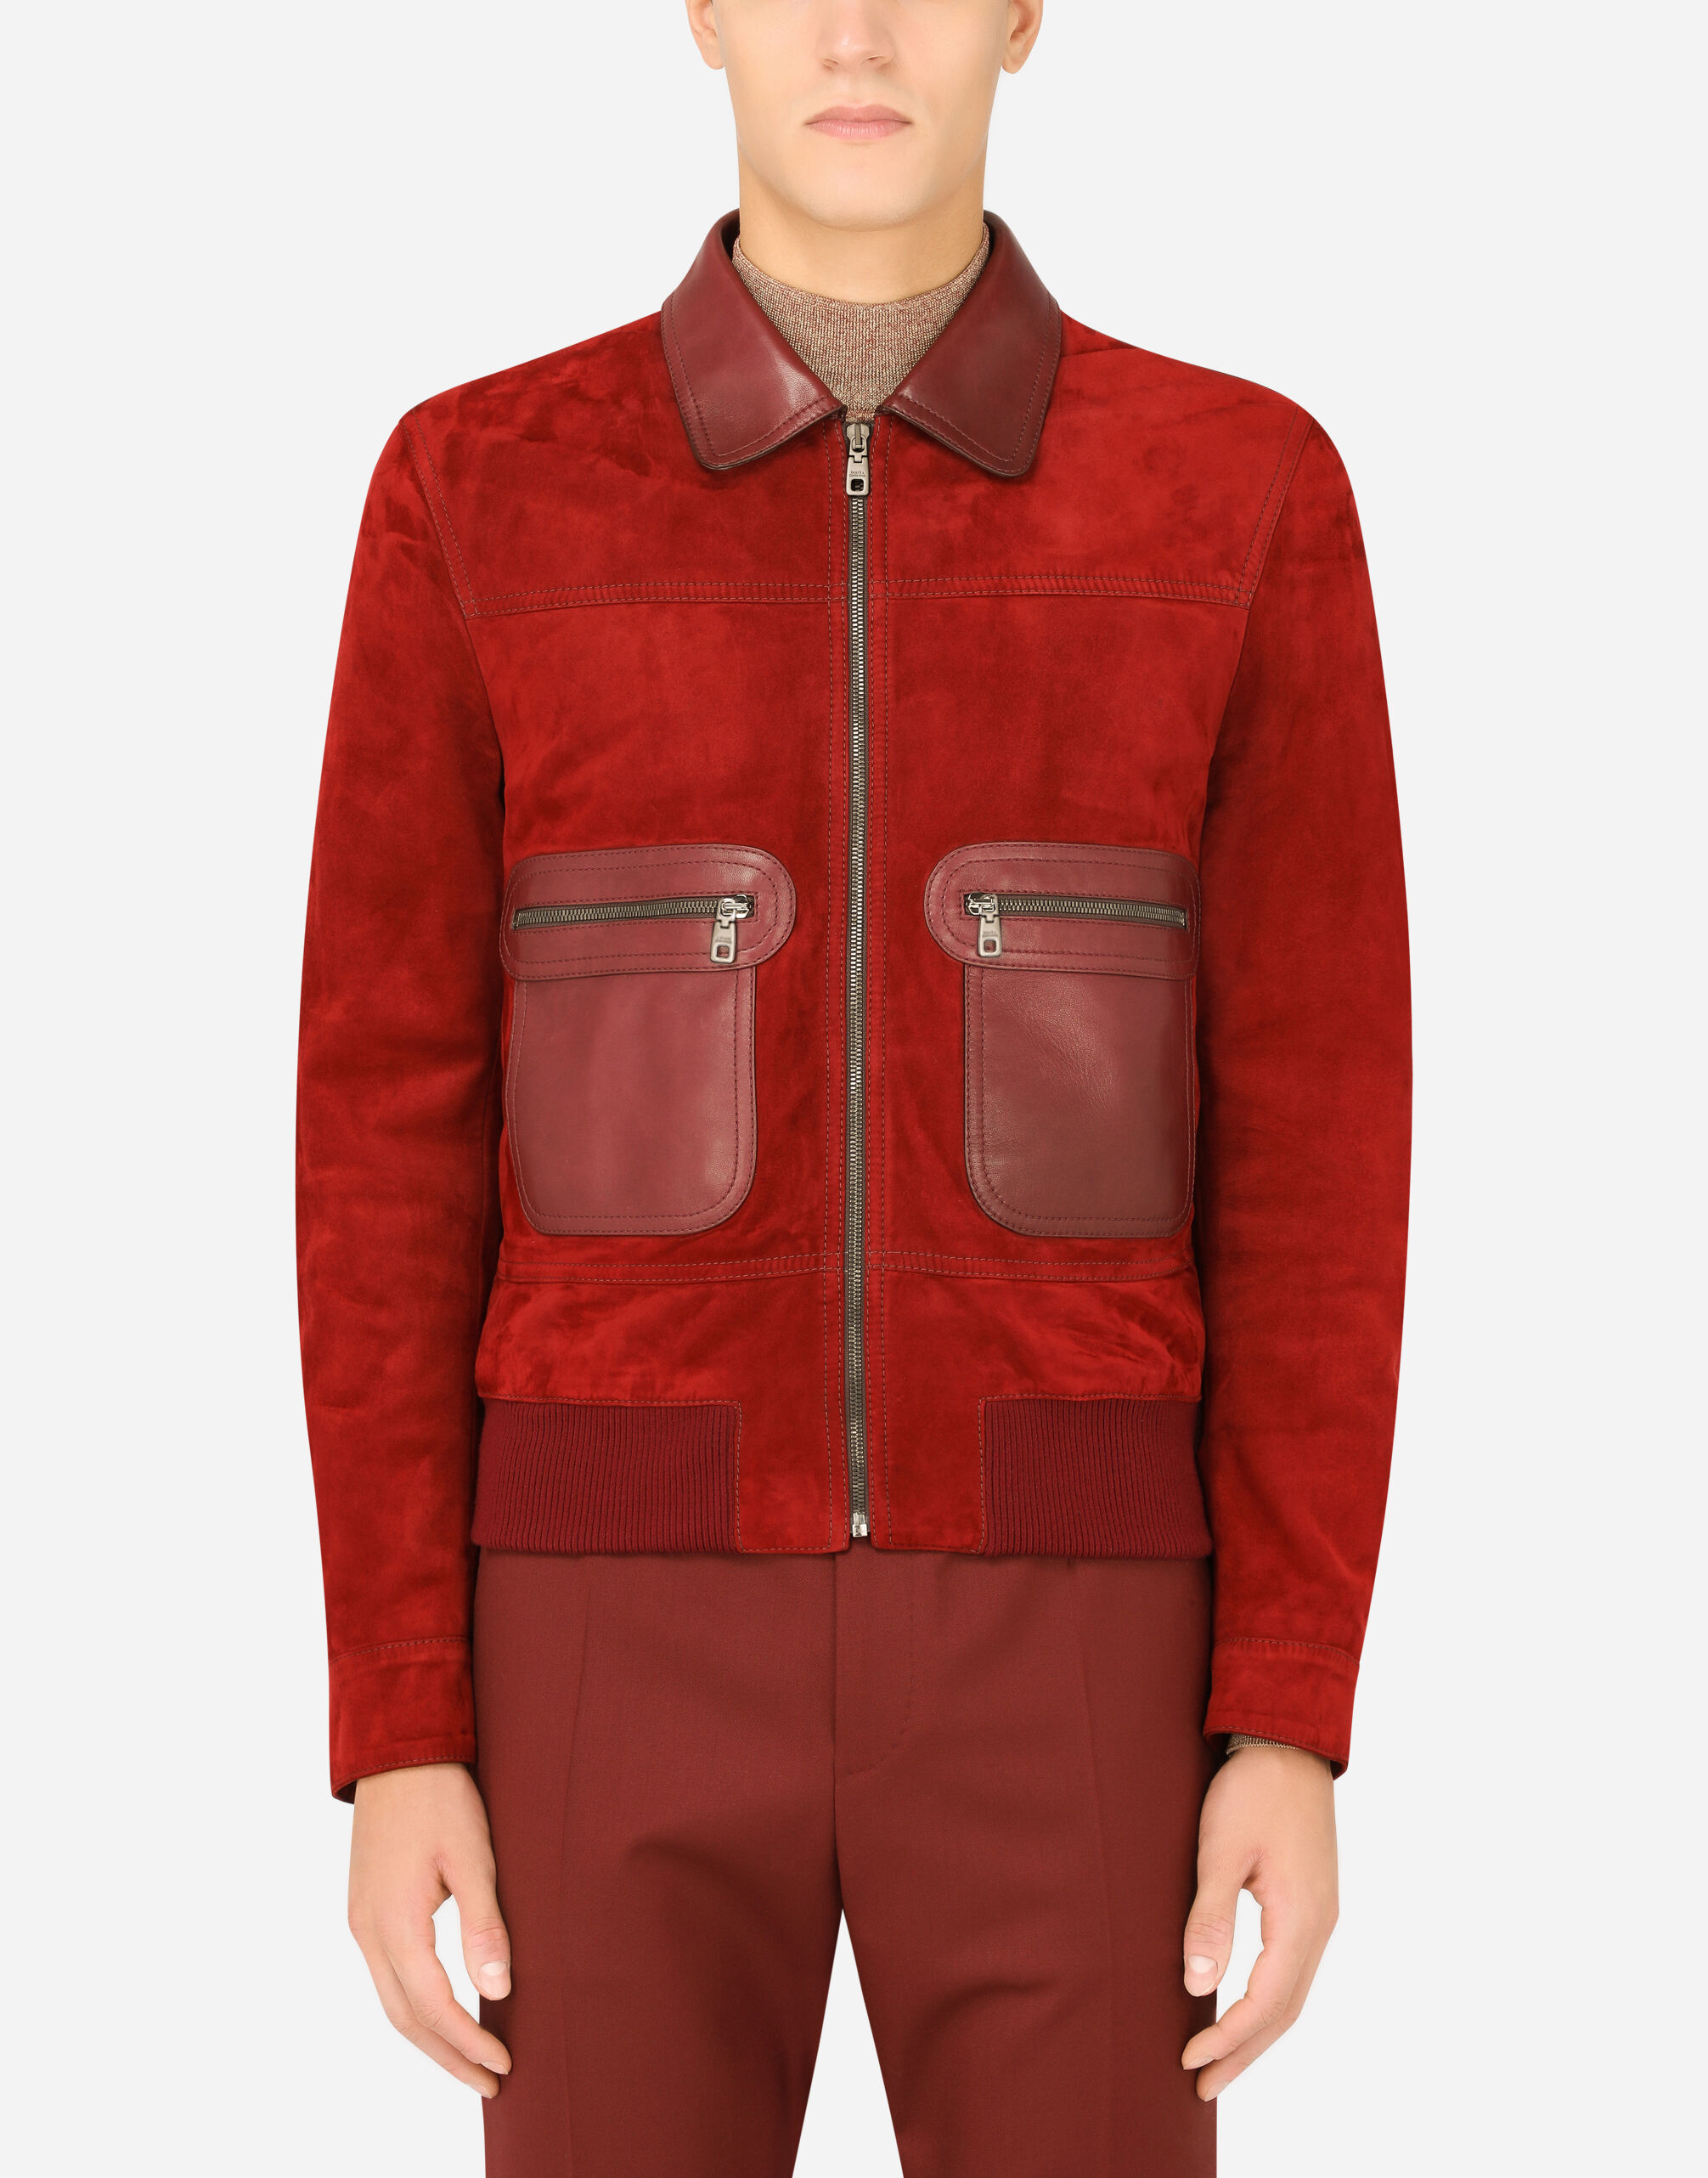 Suede jacket in Bordeaux for | Dolce&Gabbana® US